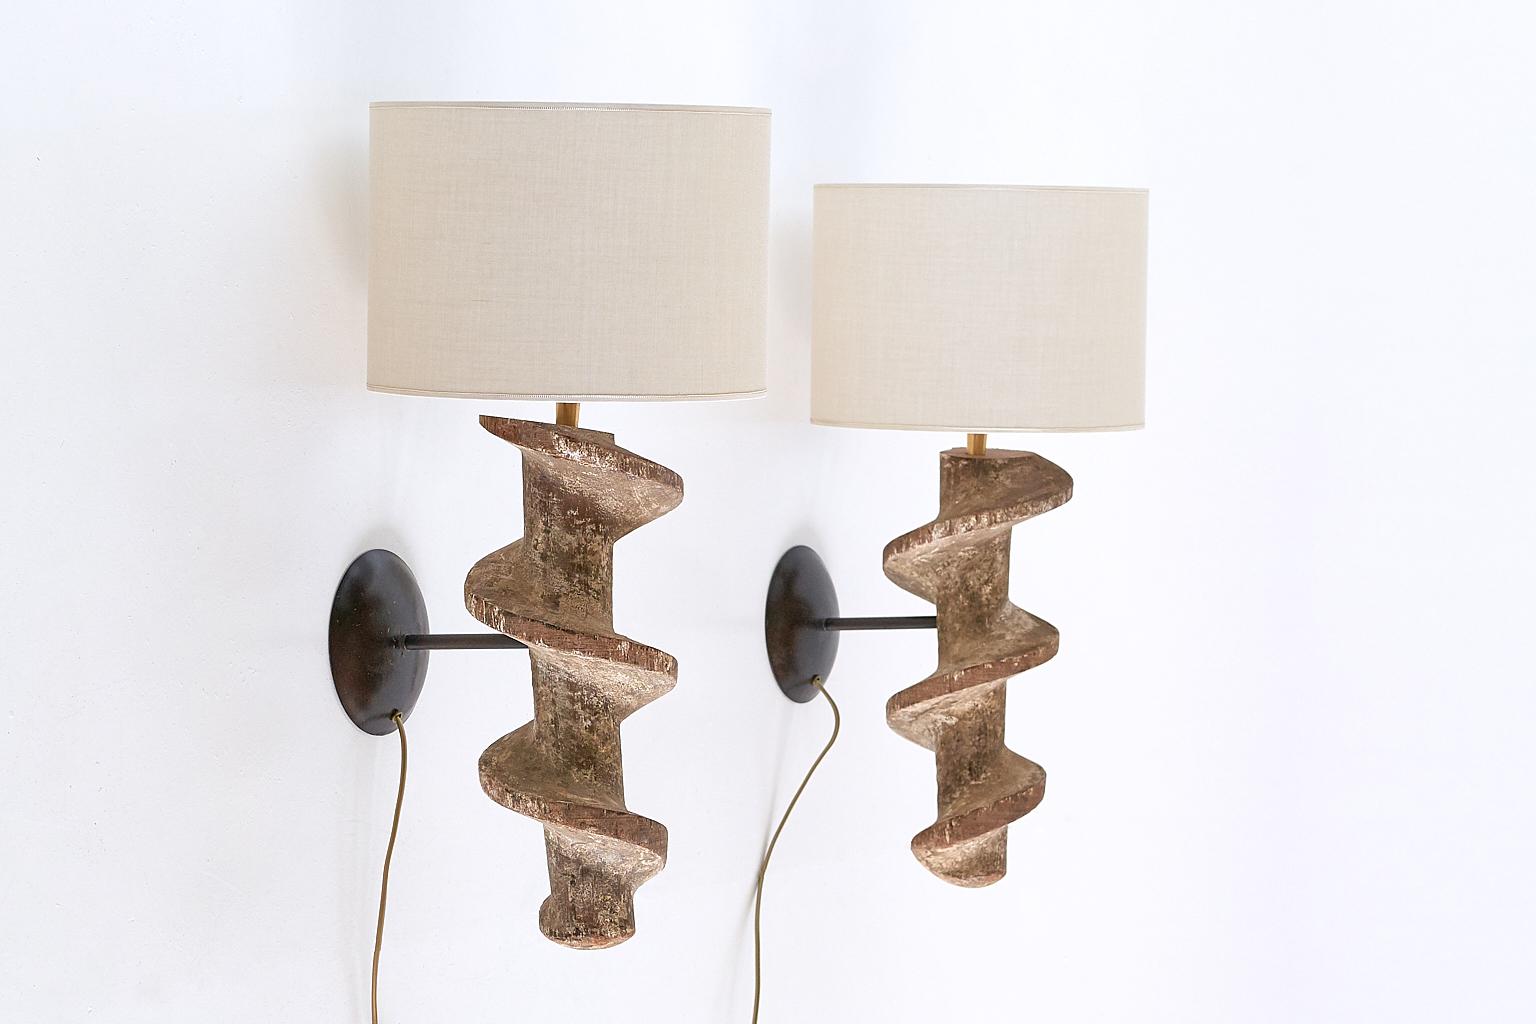 A unique and sculptural pair of wall lamps consisting of a striking spiral screw base in hardwood, wall bracket in black metal and custom fabric shades. 

The substantial concentric wooden spirals were used in the textile industry in the southern